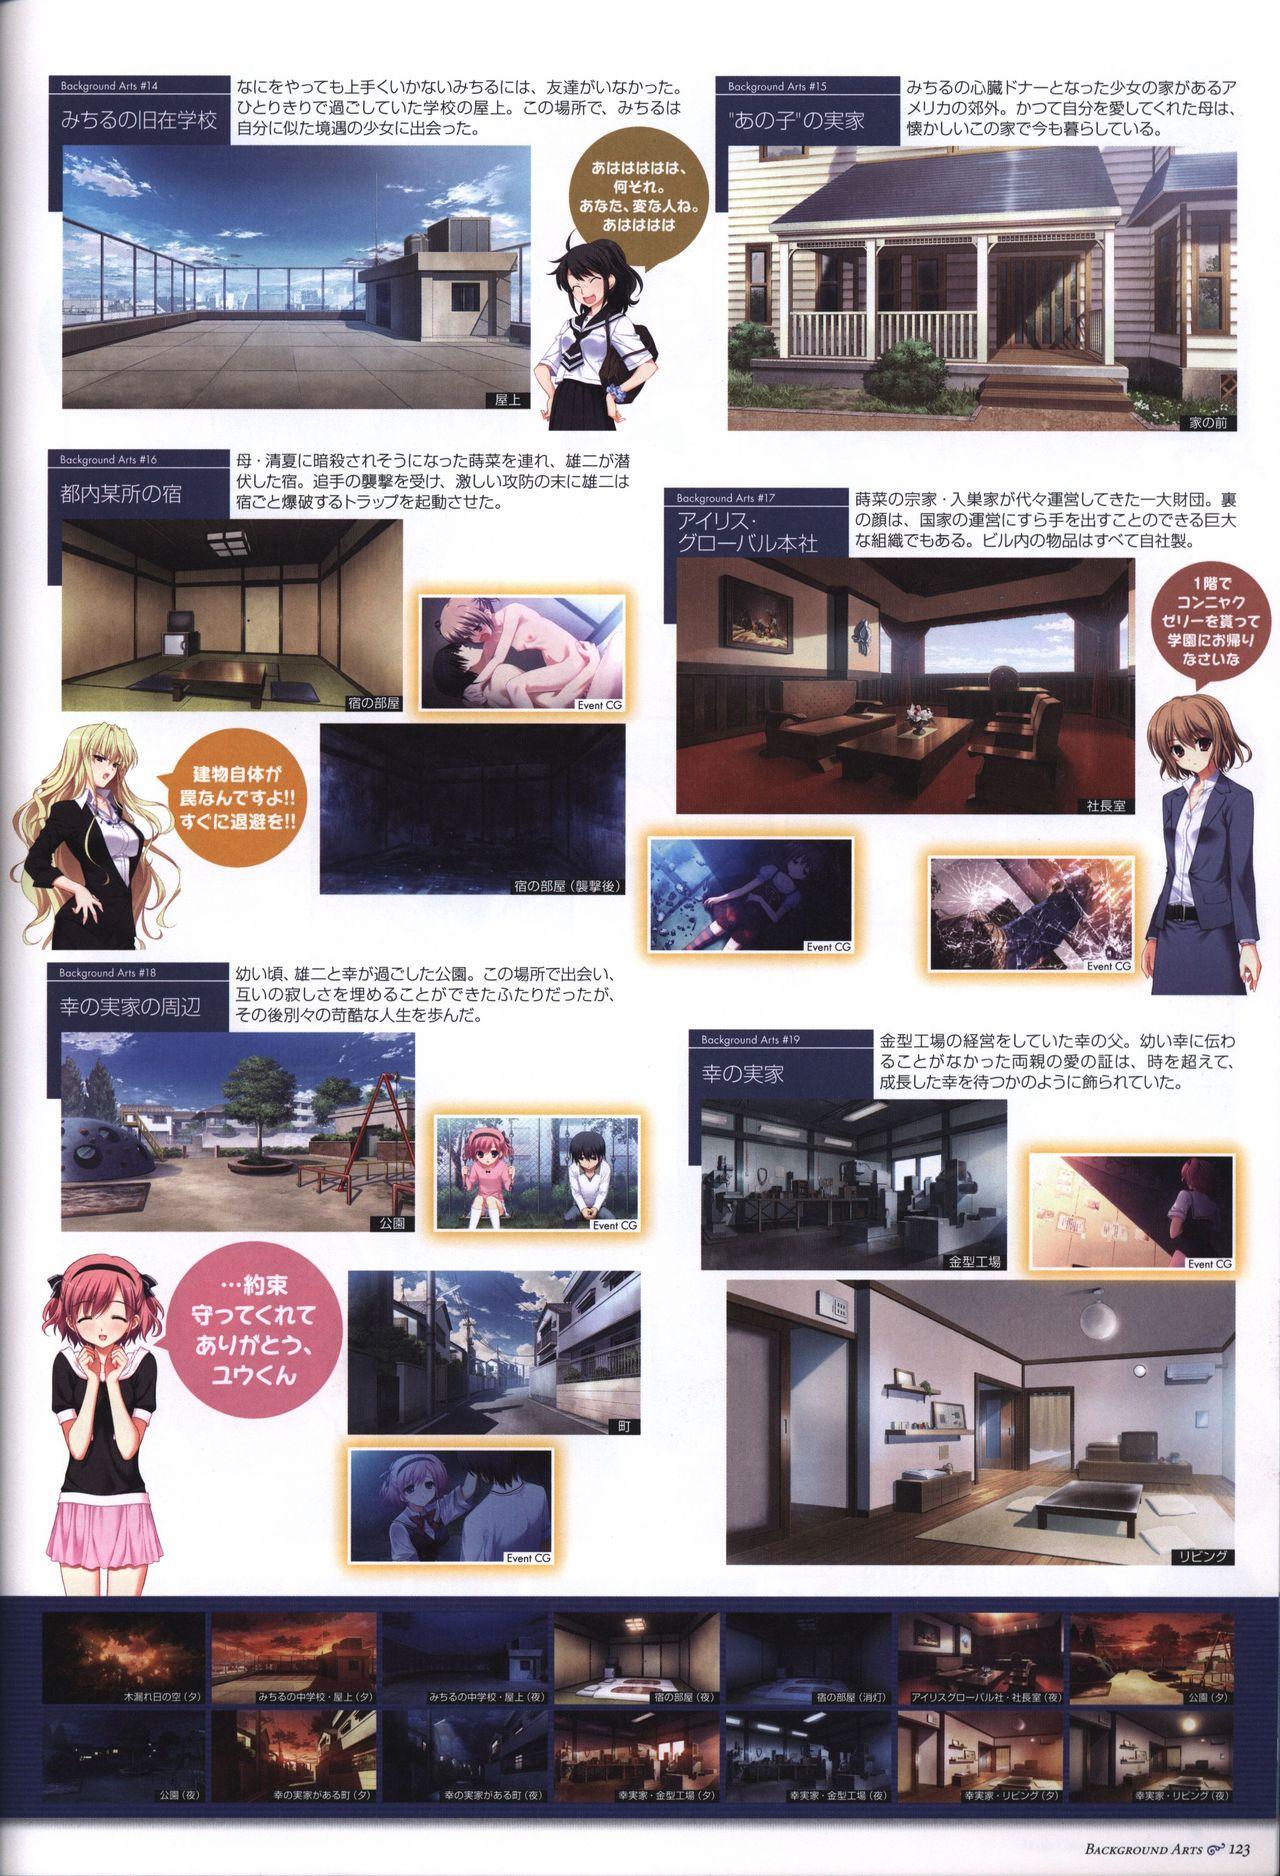 The Fruit of Grisaia Visual FanBook 123